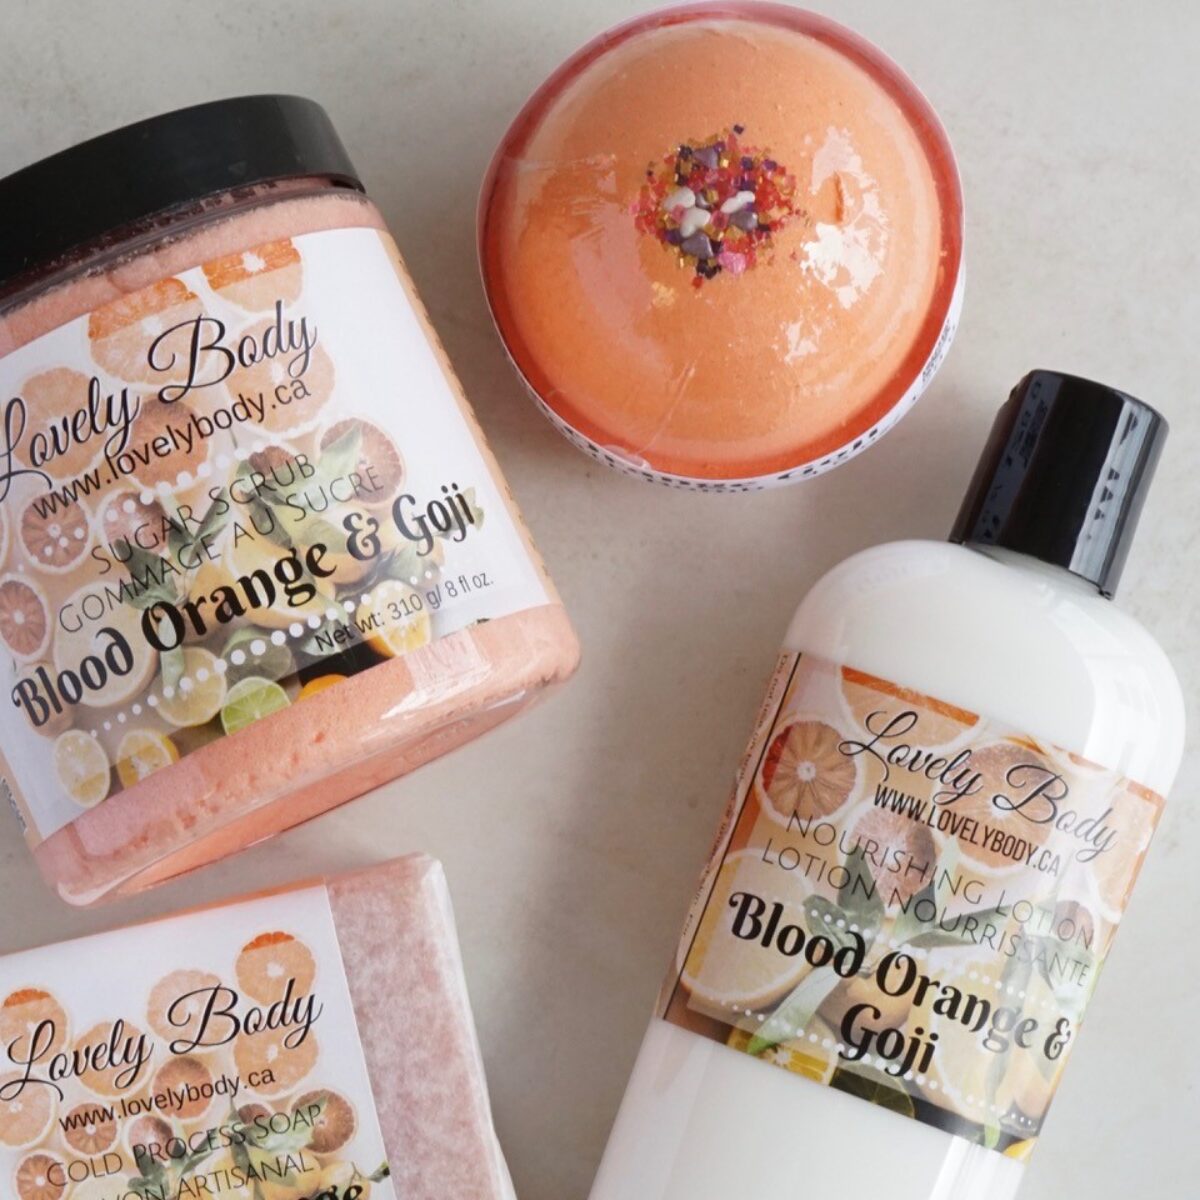 Lovely Body Products: Quality soaps and lotions handmade in